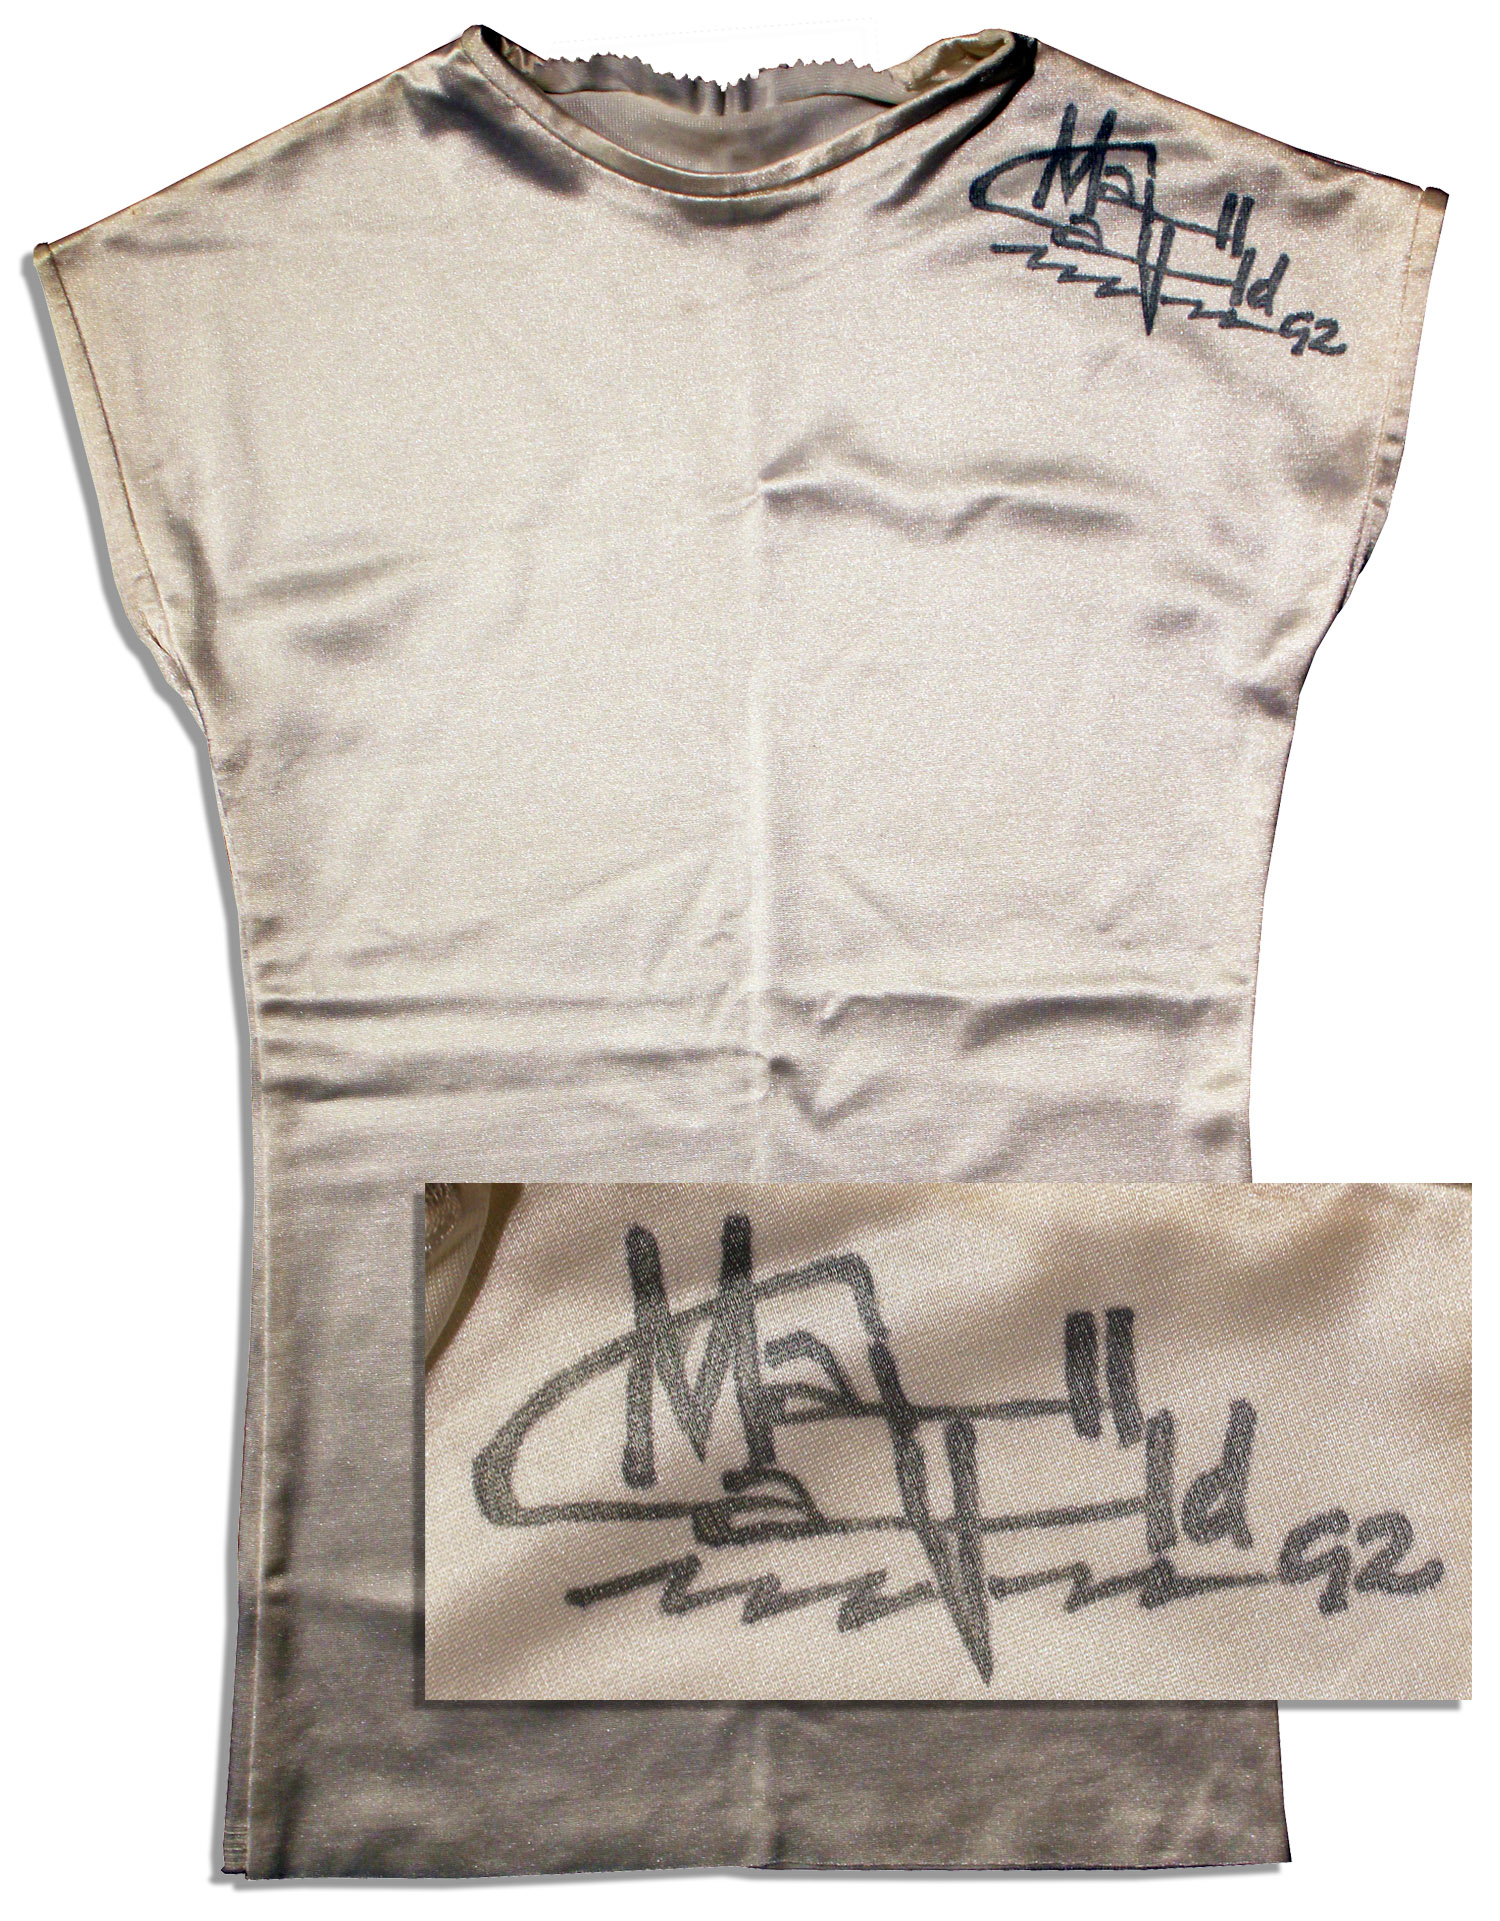 Maxwell Caulfield Signed Shirt from Grease 2 with COA